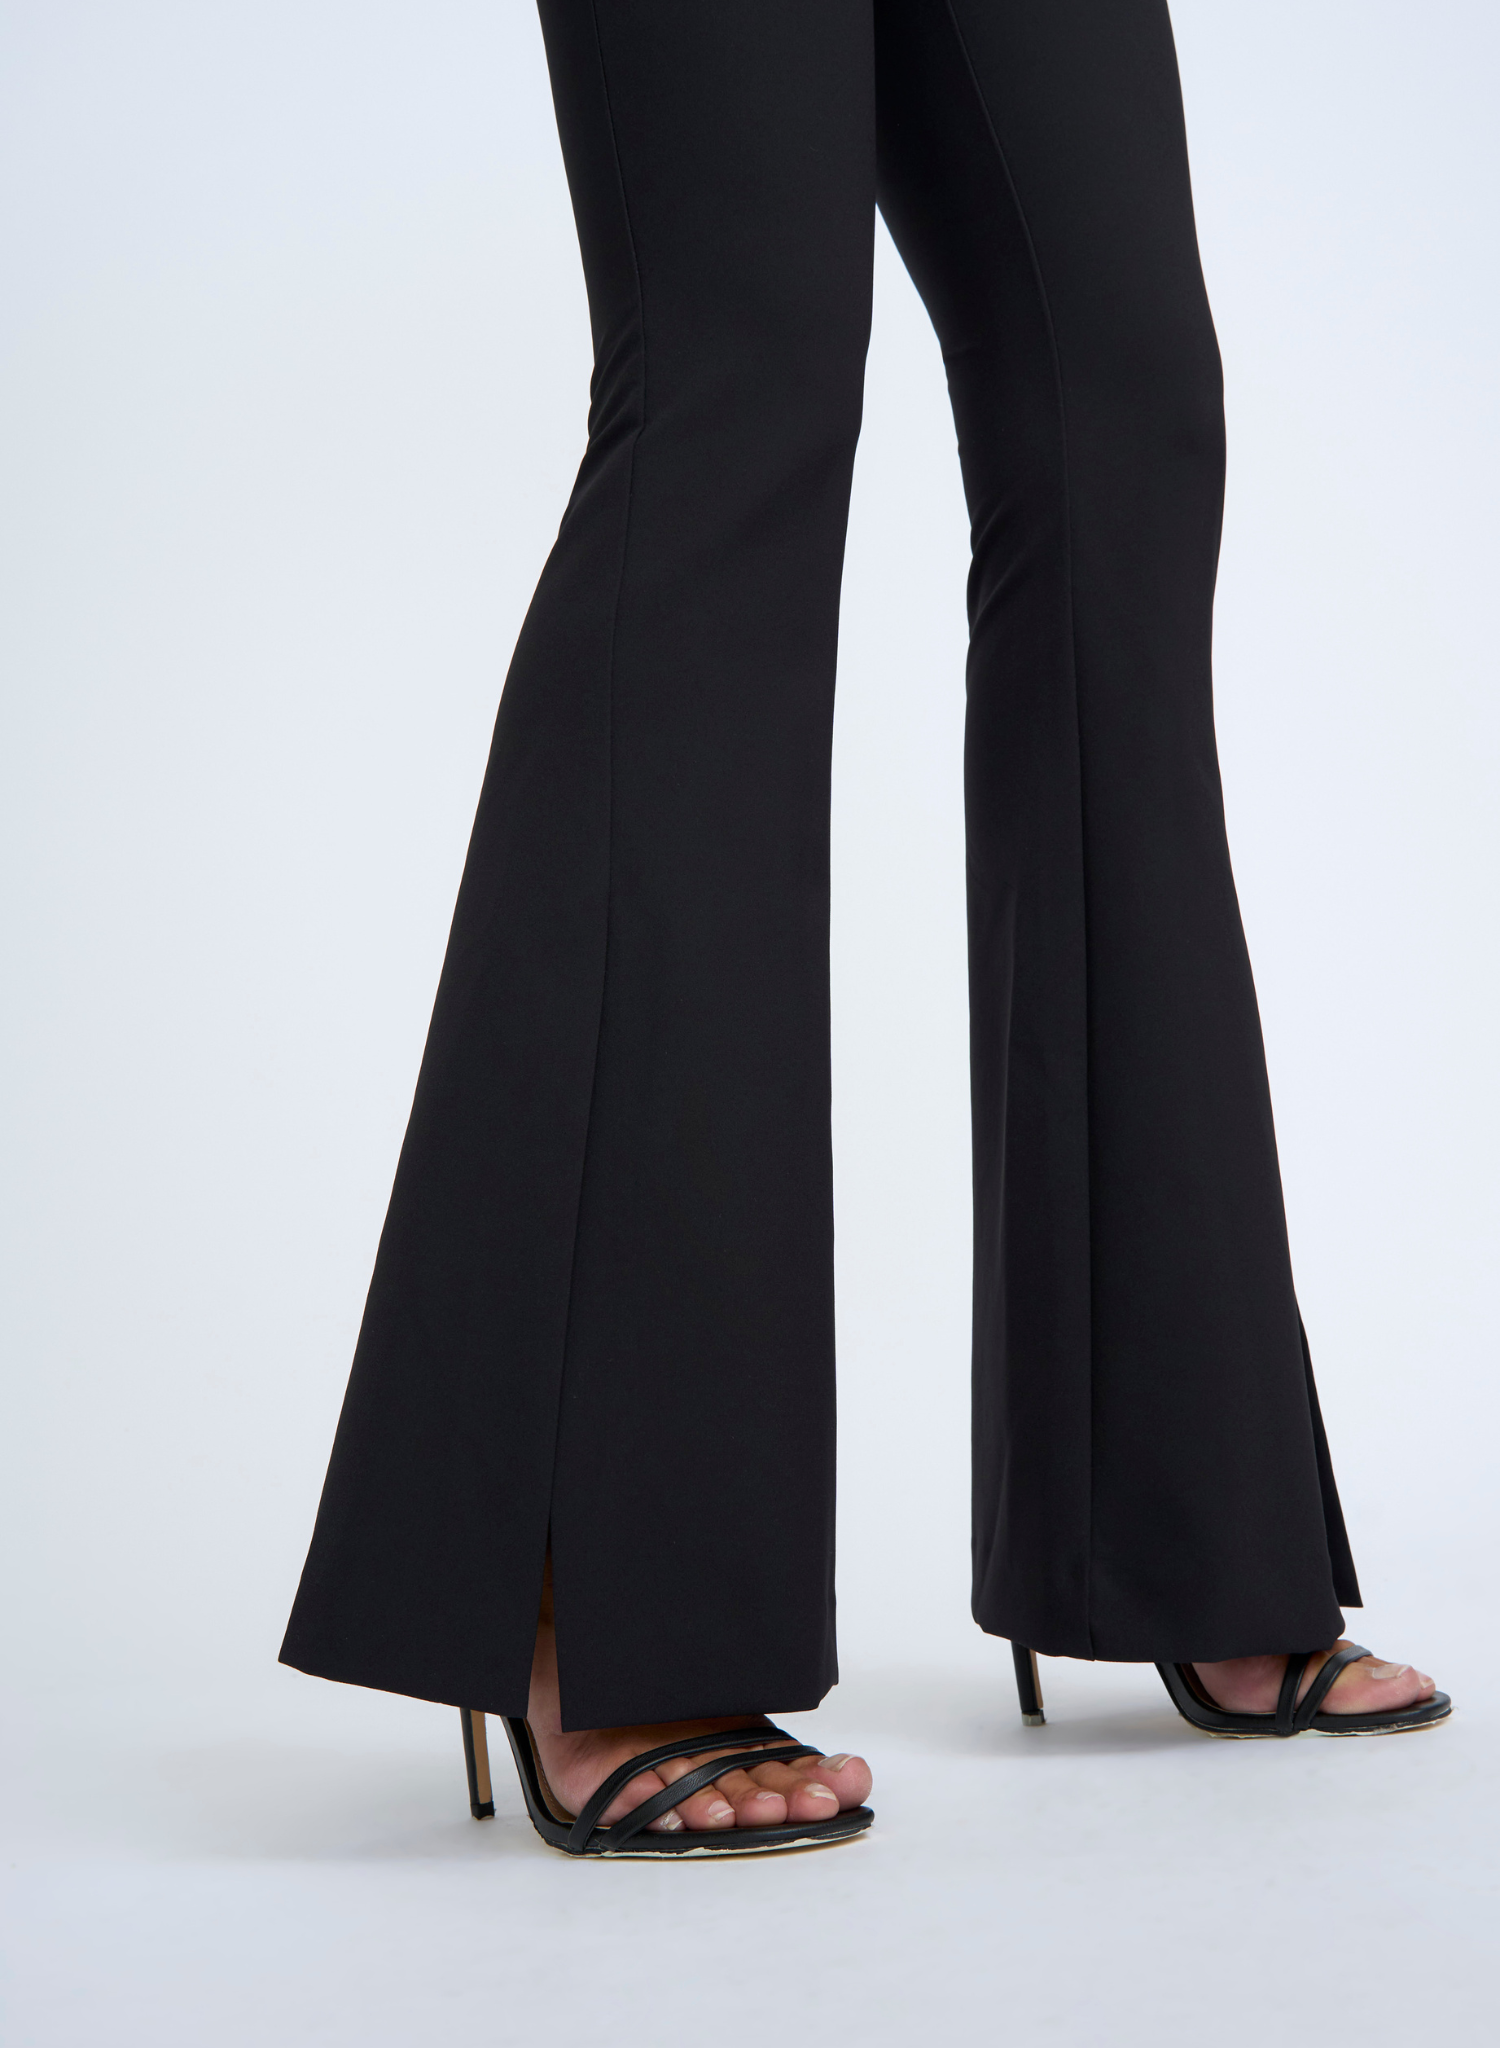 The Sliced Flare Knit Pant features a dramatic flared front split and is form fitting while flattering to the figure. The thick waistband has been designed to provide both comfort and support for all day wear. From your staple heels to sneakers, this pant is versatile and can be dressed up or down.